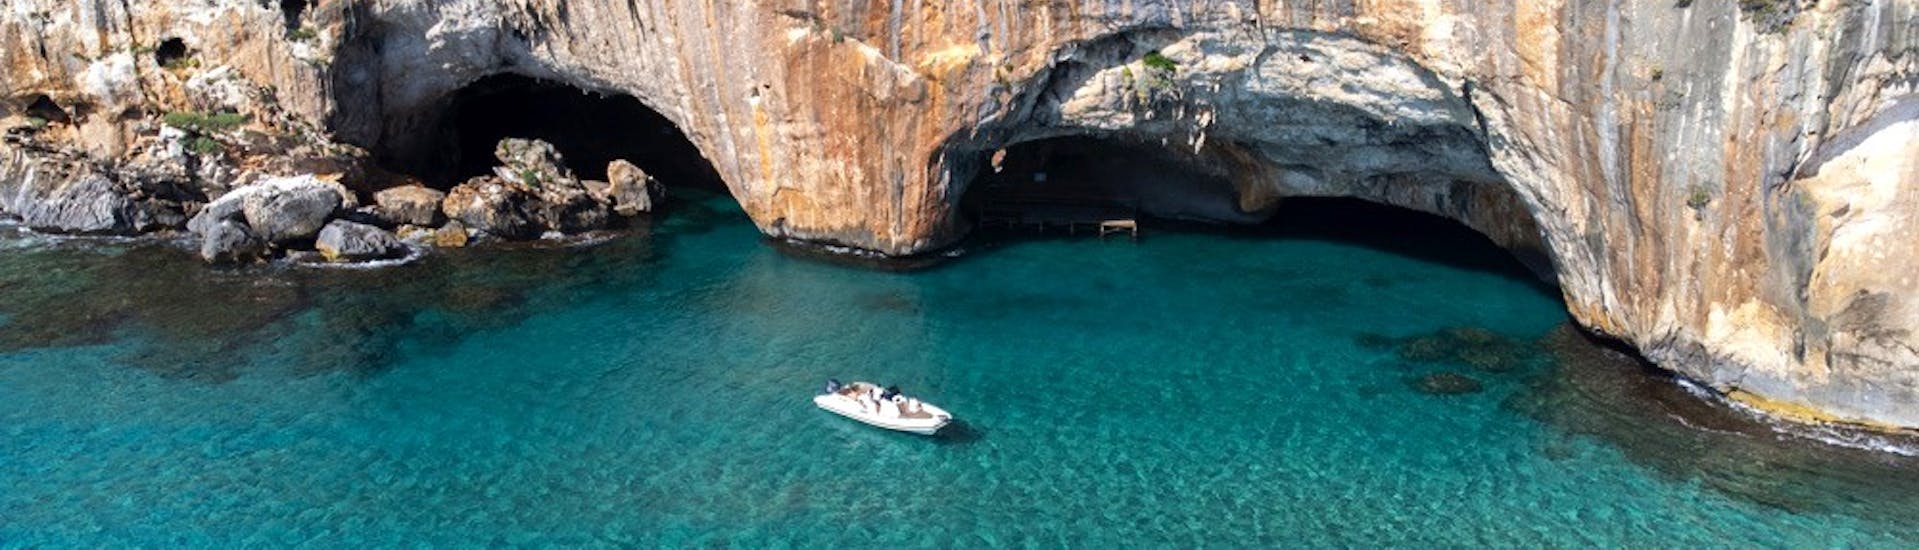 The RIB boat from Nuovo Consorzio Trasporti Marittimi is navigating during the RIB Boat Trip in the Gulf of Orosei from Cala Gonone with Swimming Stops.